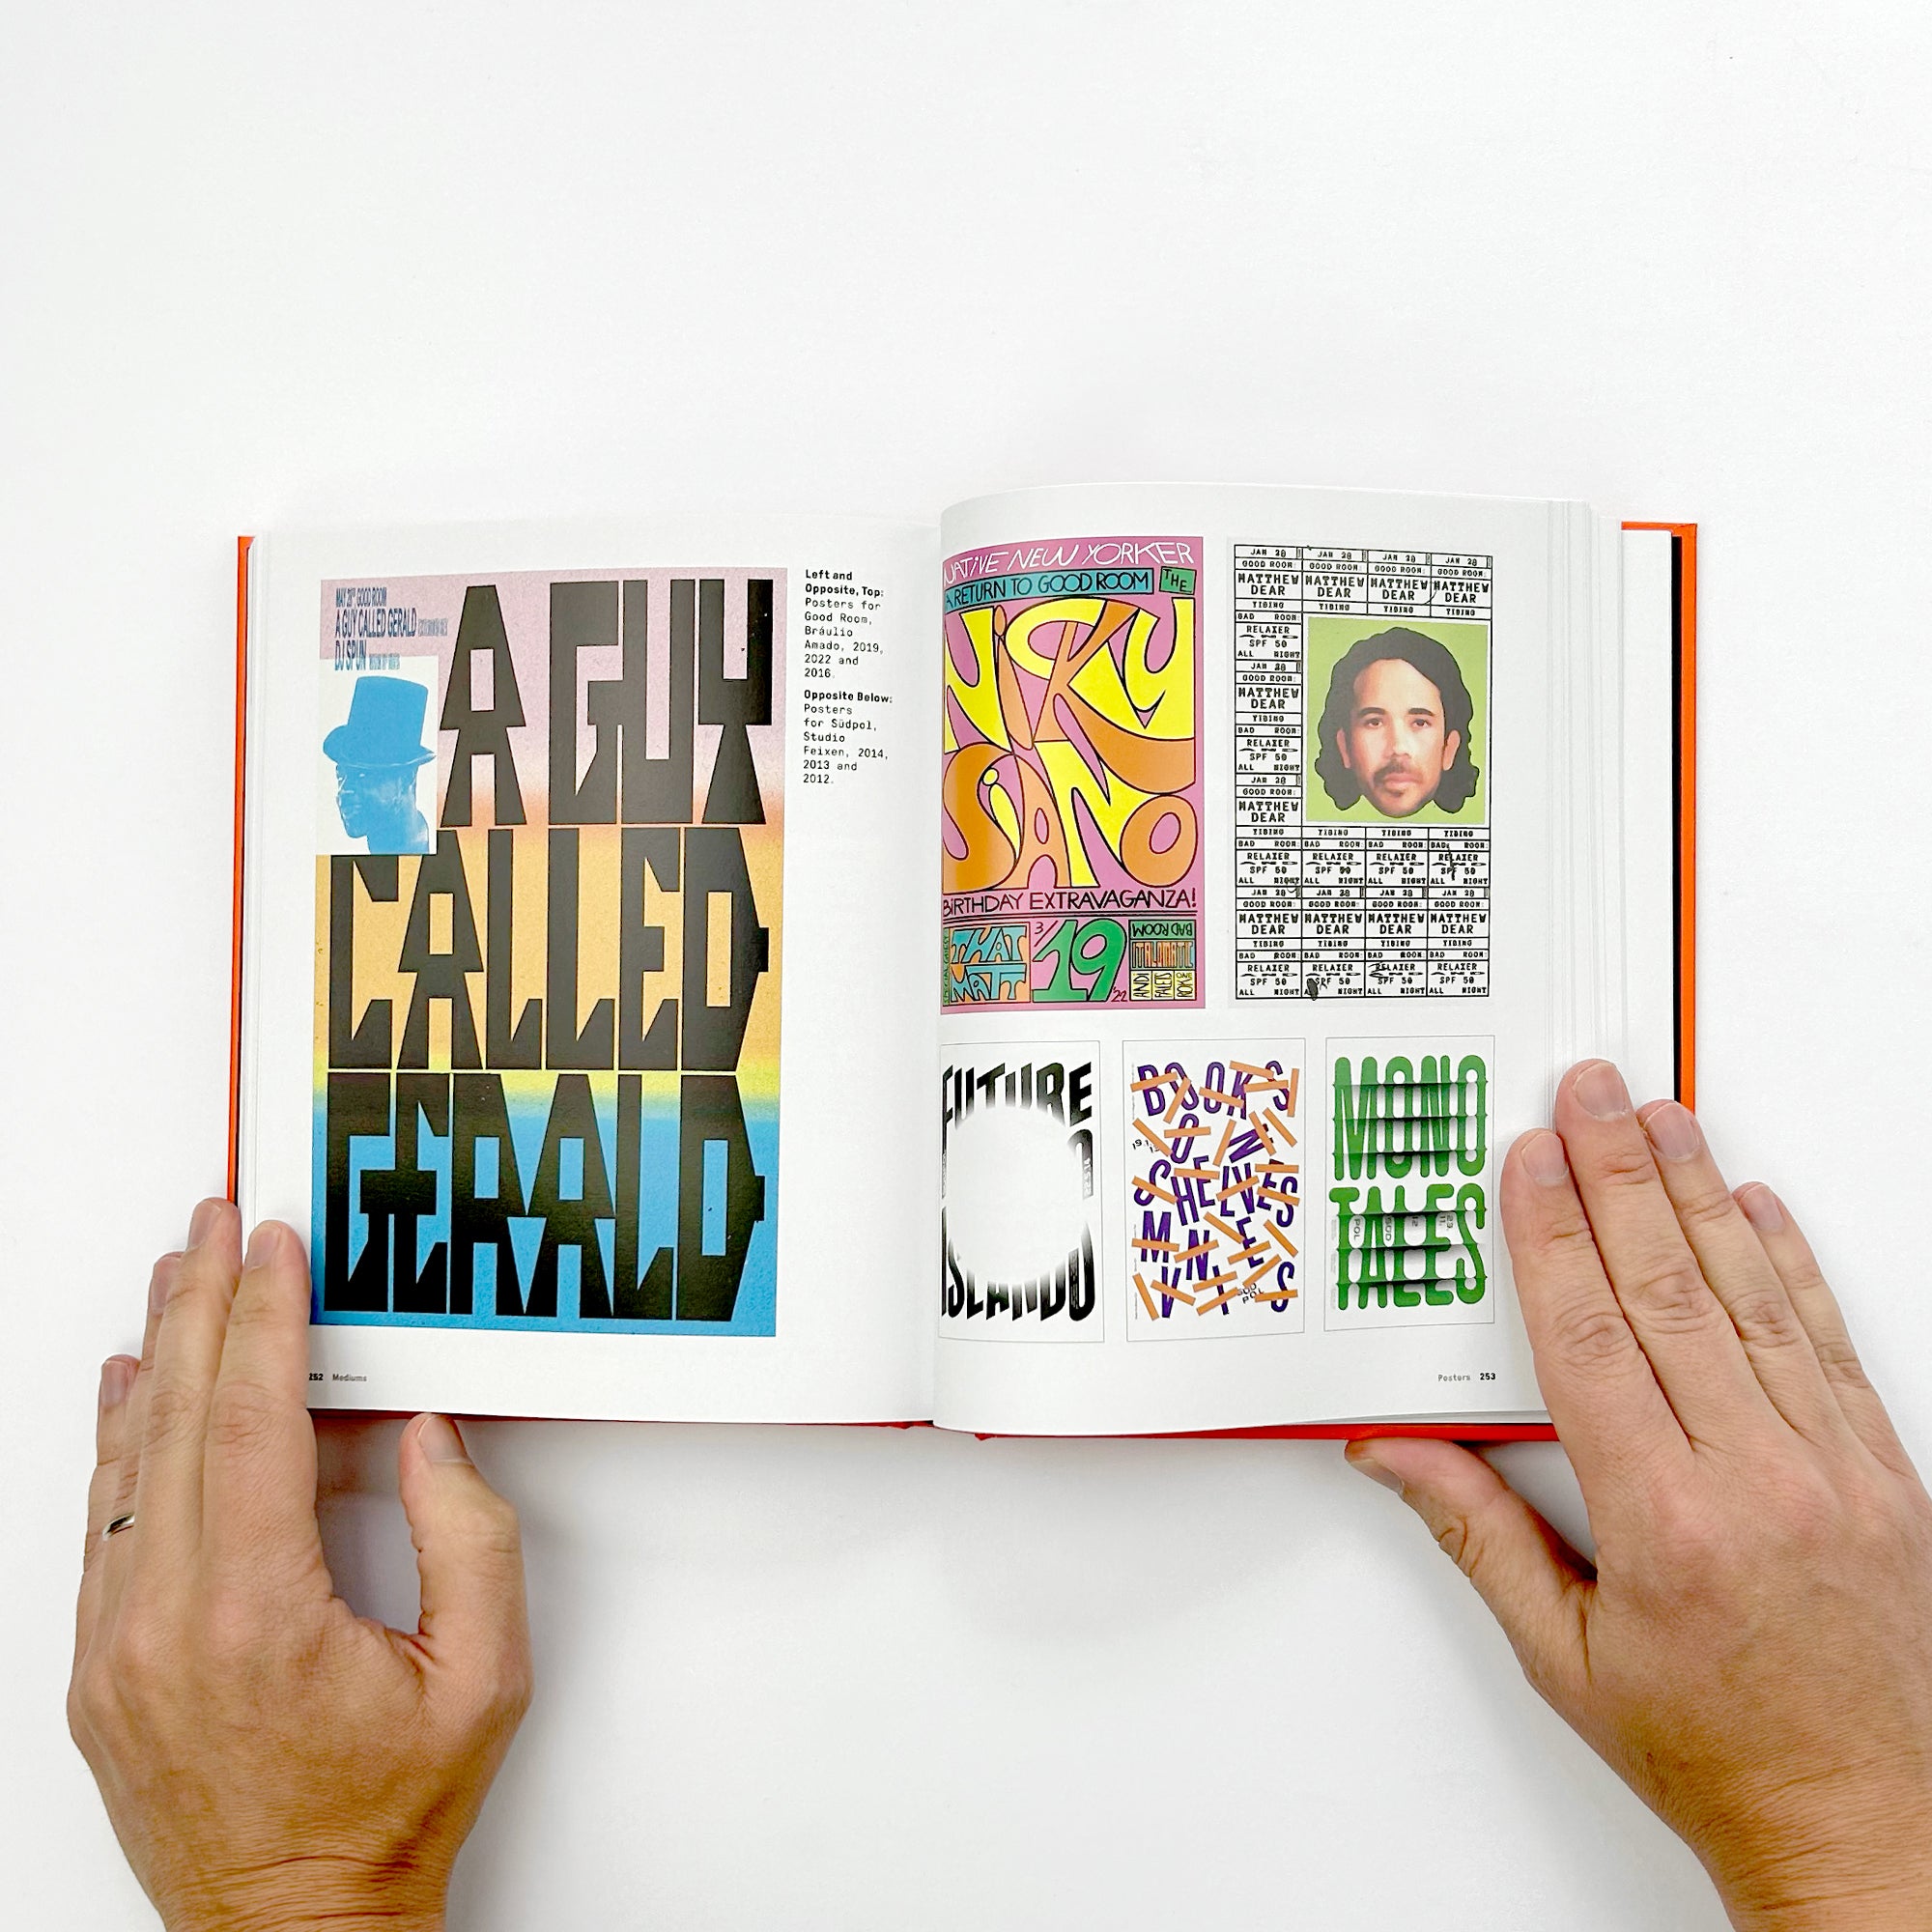 The Graphic Design Bible